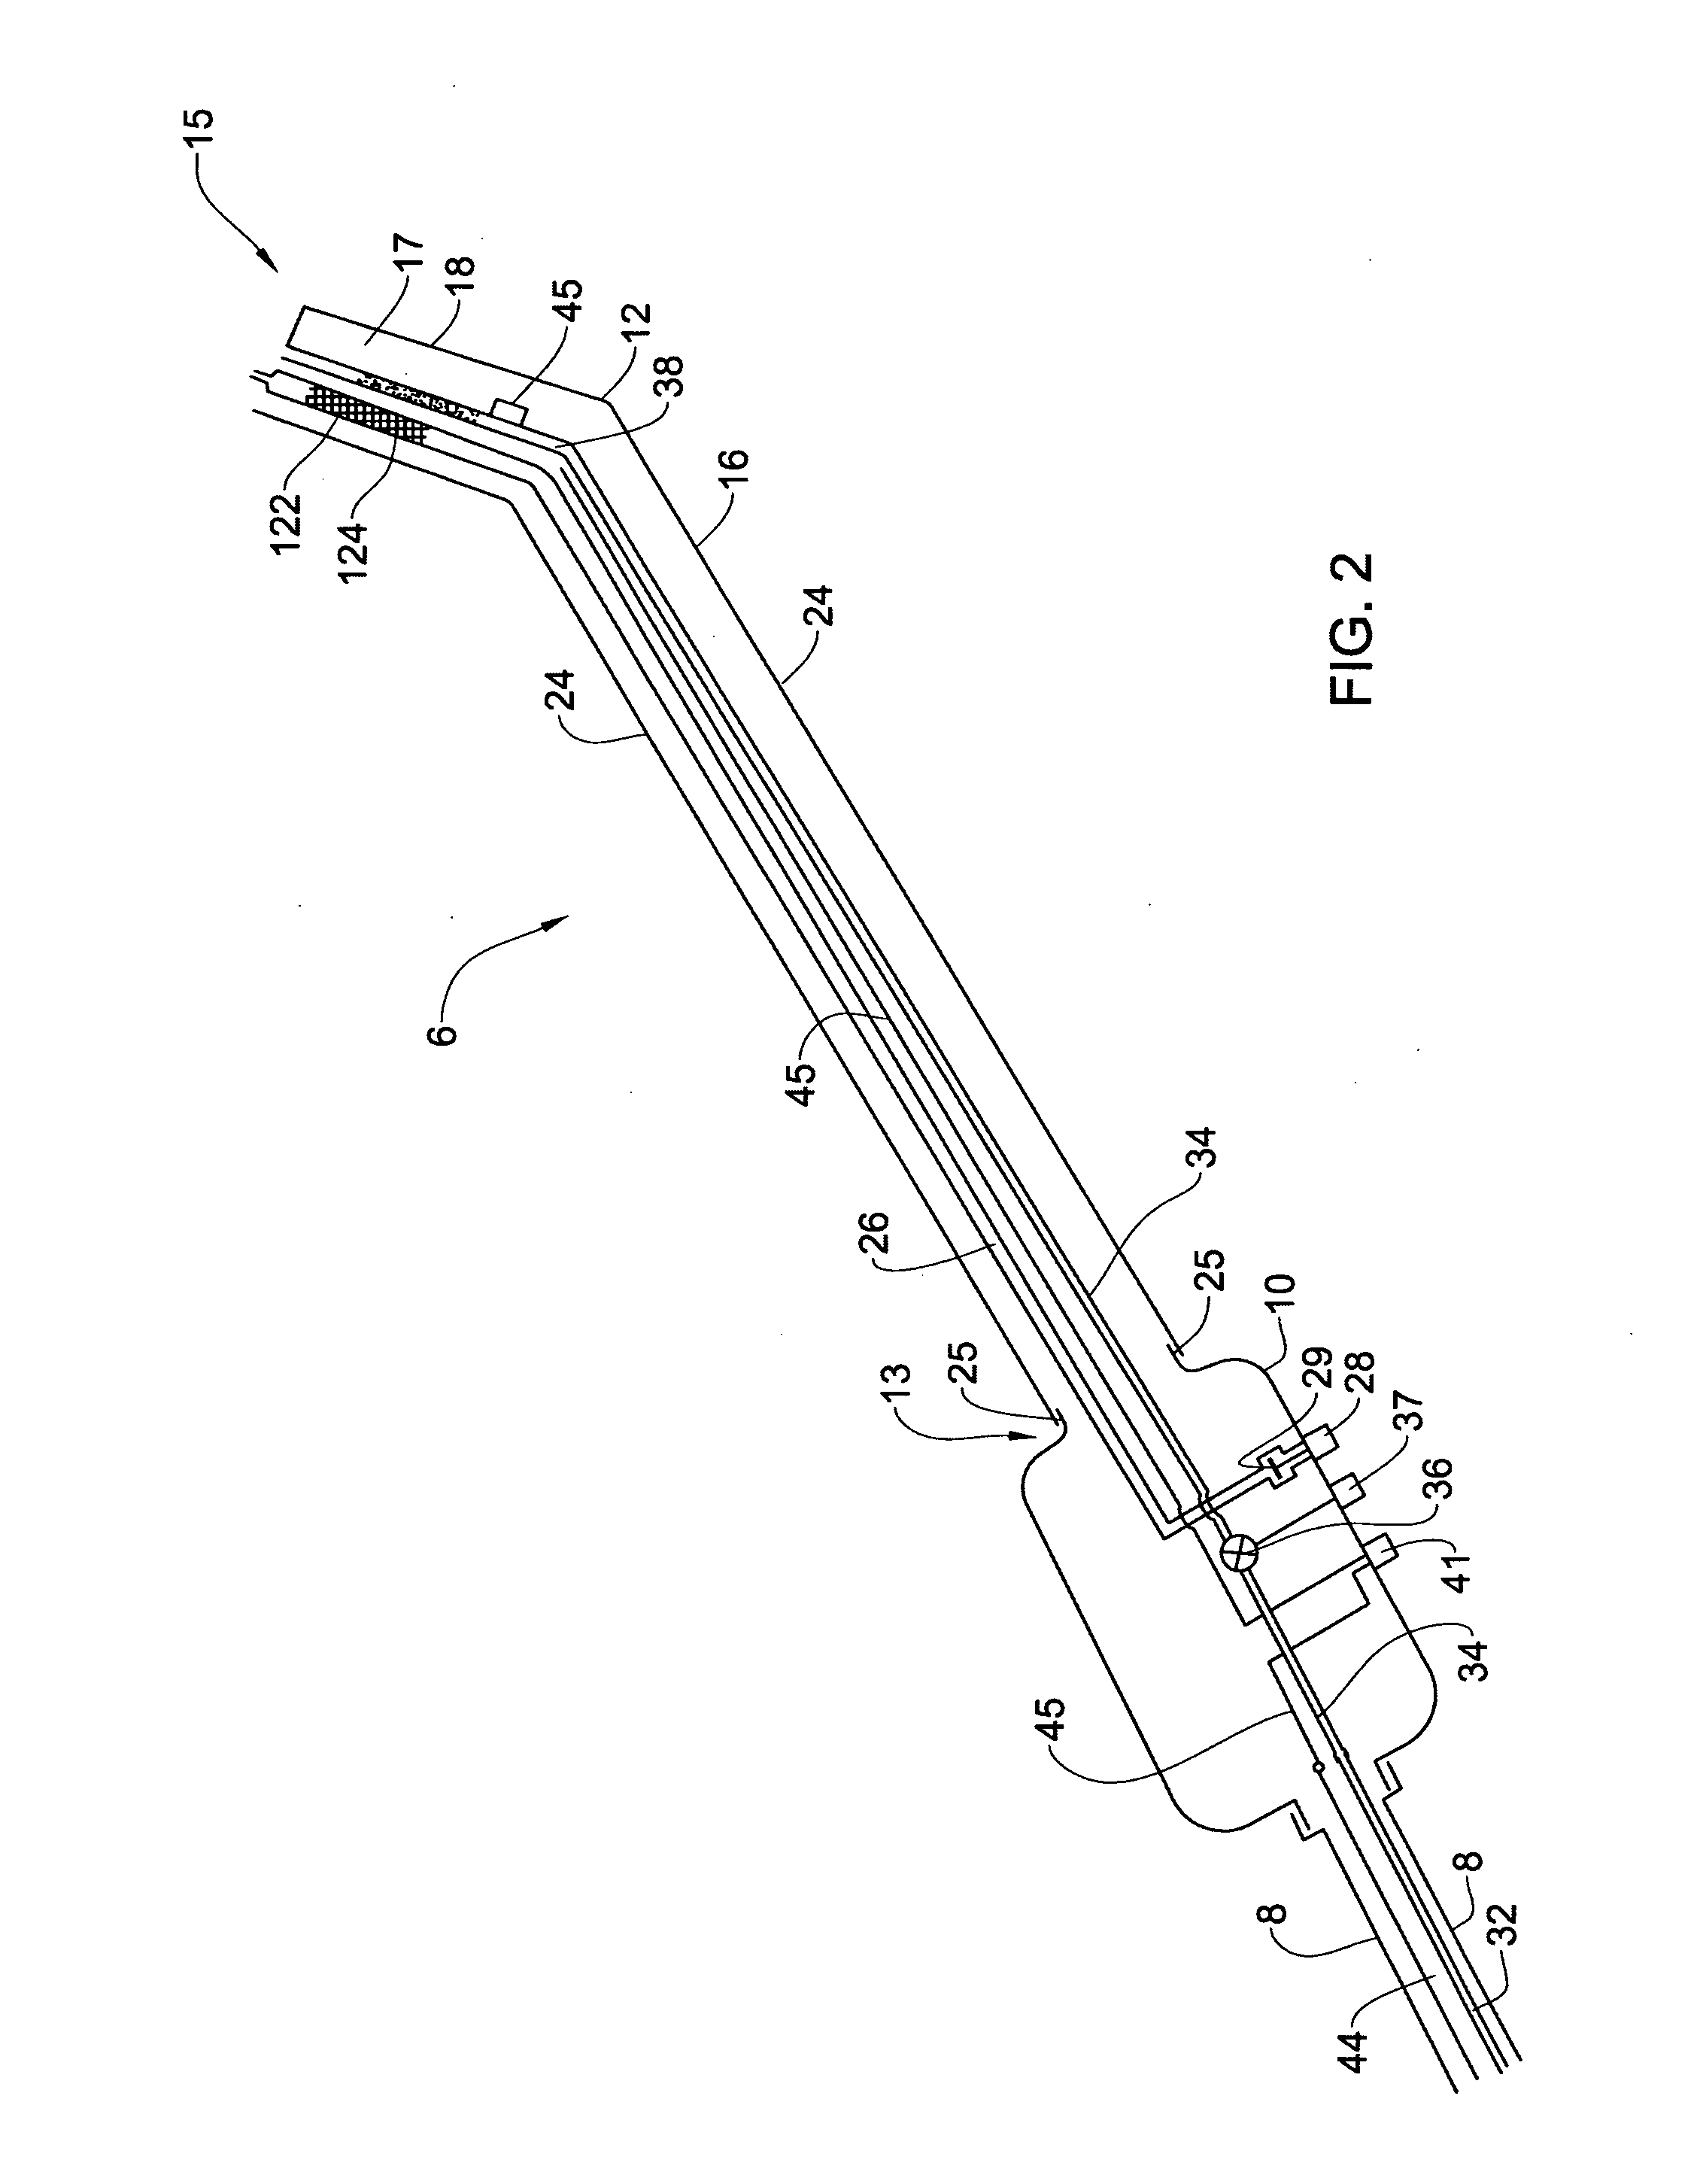 Pharmaceutical composition and system for permeabilizing fetal membranes